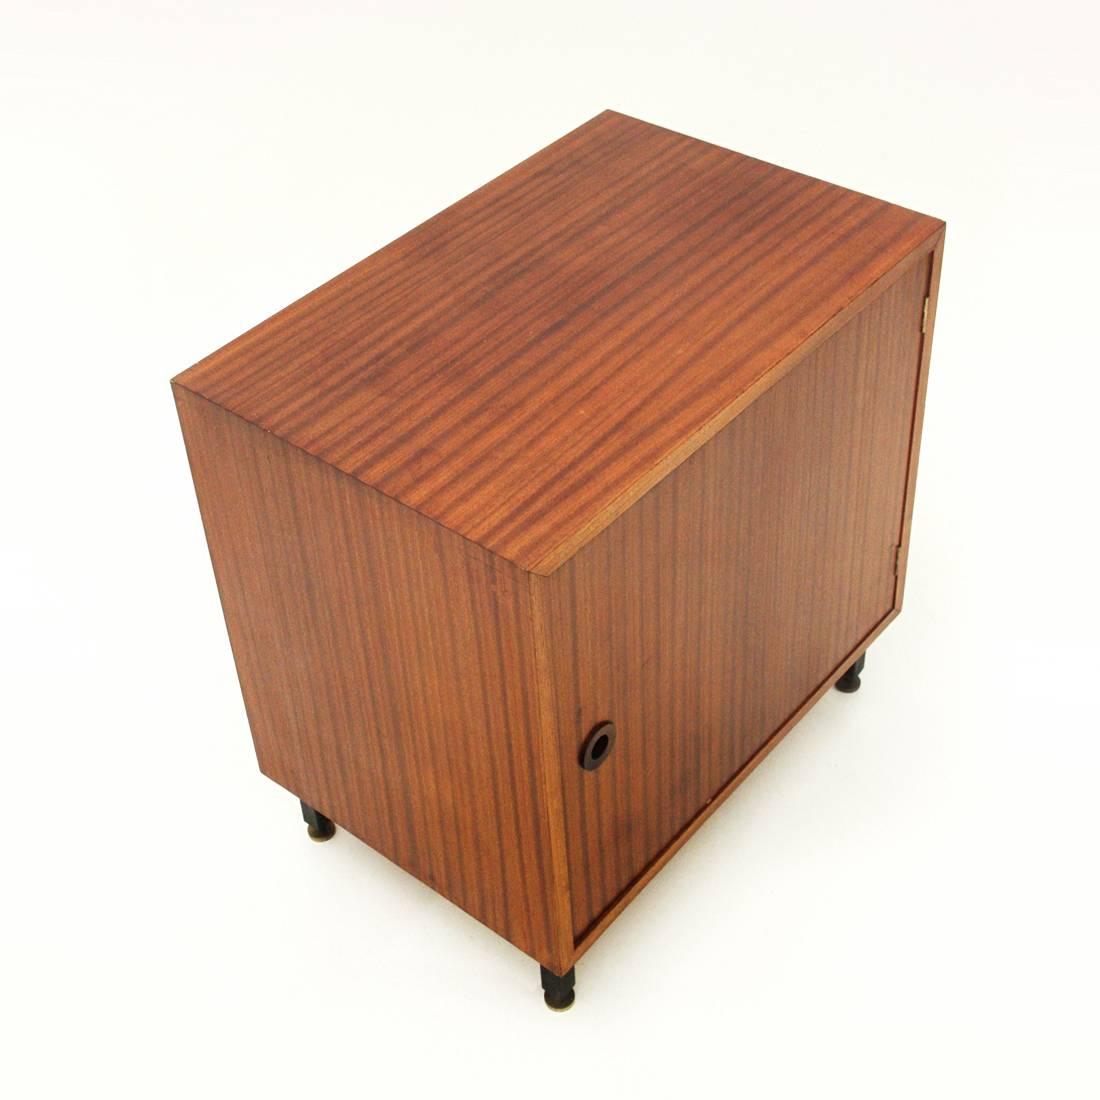 Small belief of Italian production of the 1960s.
Structure in teak veneered wood.
Metal legs with adjustable brass foot.
Circular teak handle
Structure in good condition, some signs and lack of veneer due to normal use over time.